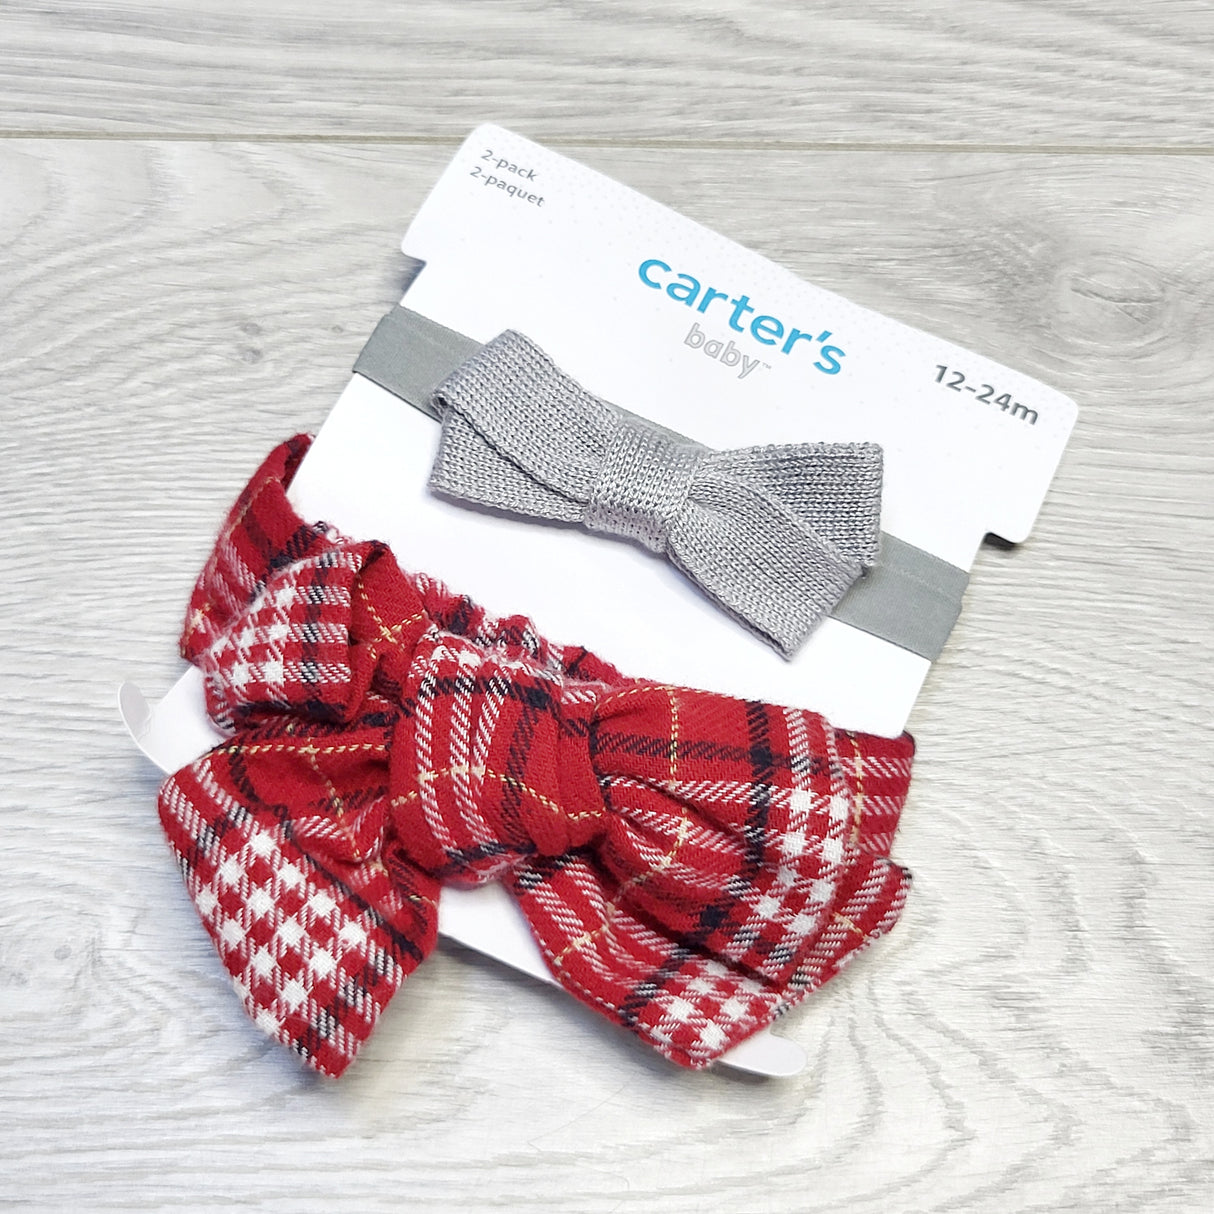 COWN - NEW - Carters 2-pack headwraps. 12-24 months